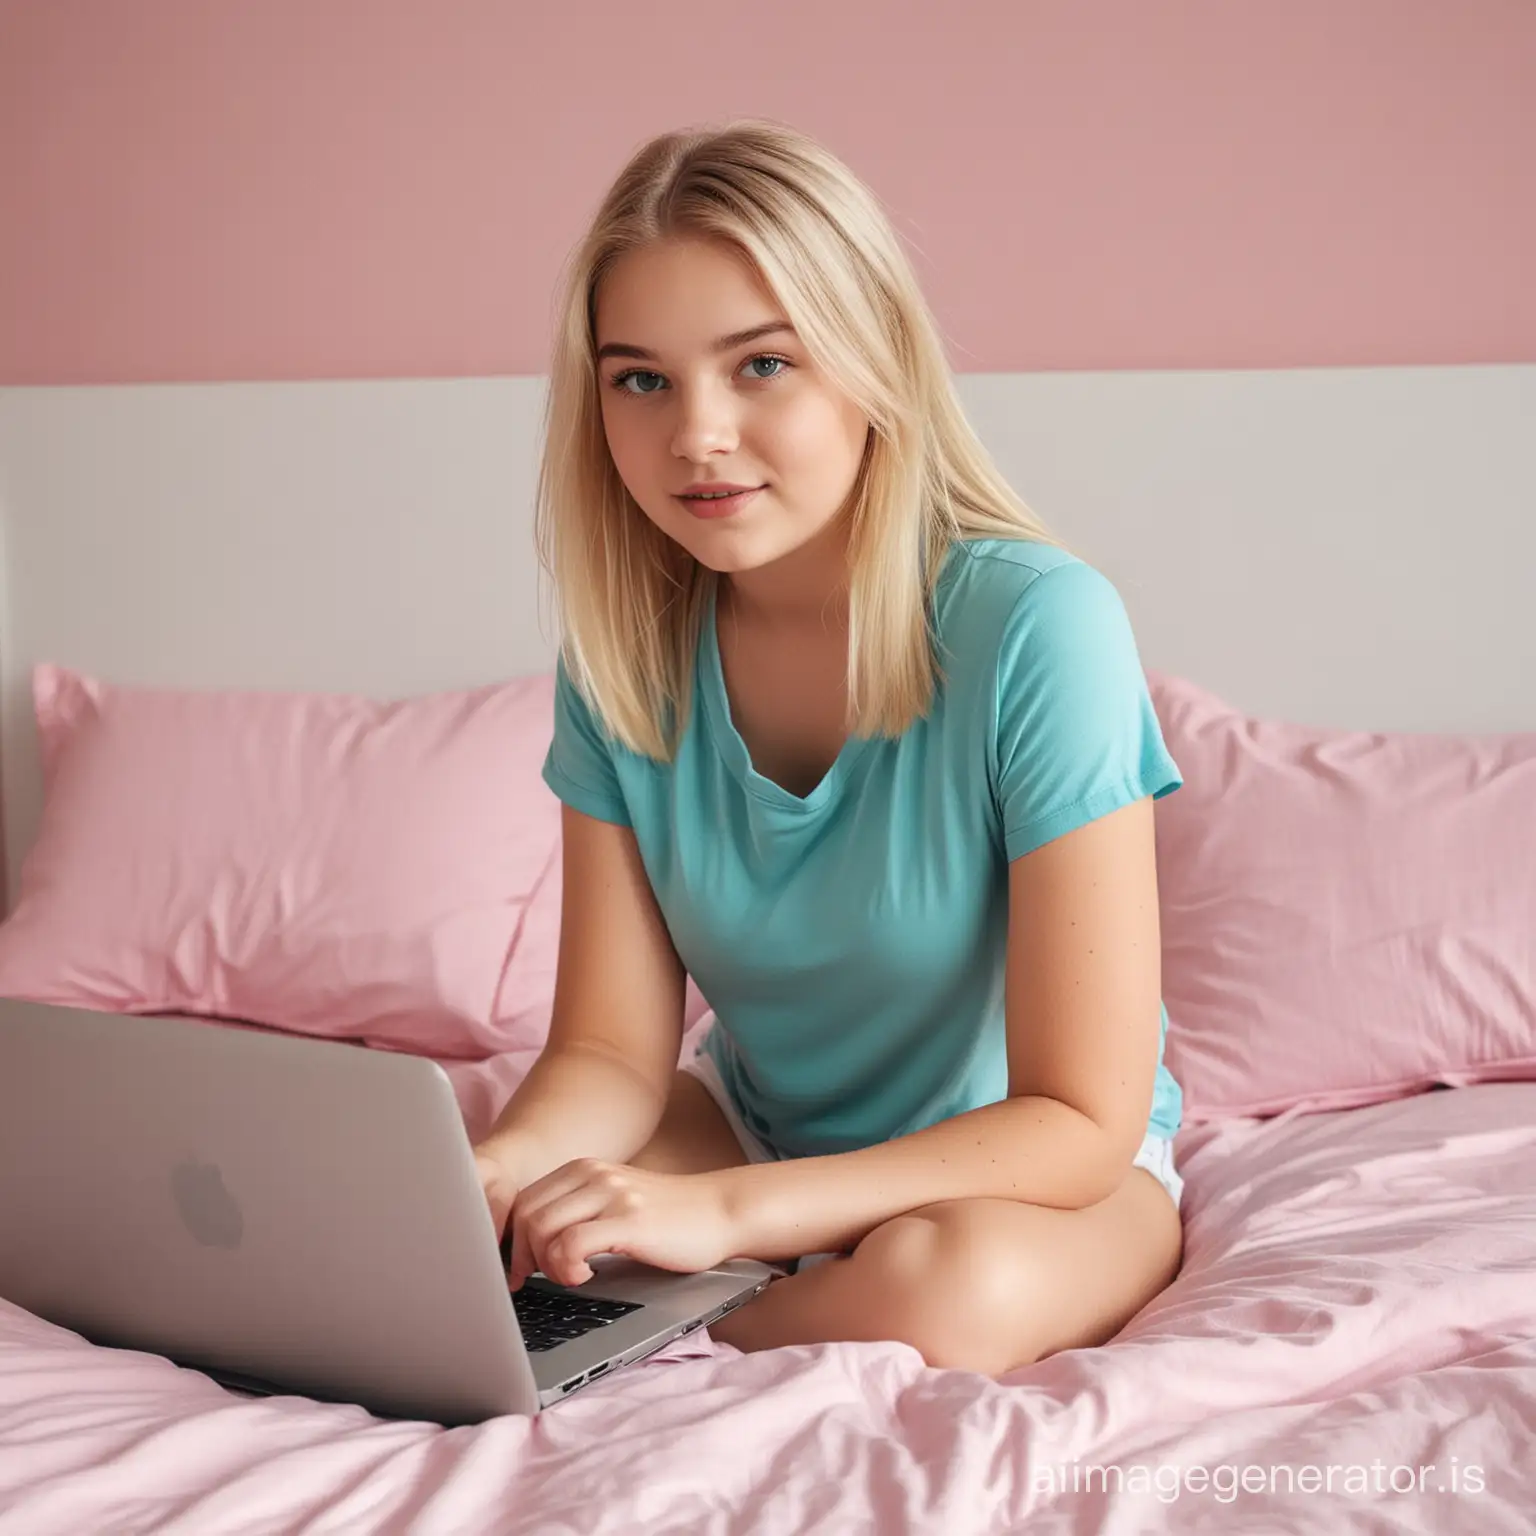 Thirteen years old curvy blonde girl with straight hair in white short and teal top playing on a 14" laptop on her pink bed